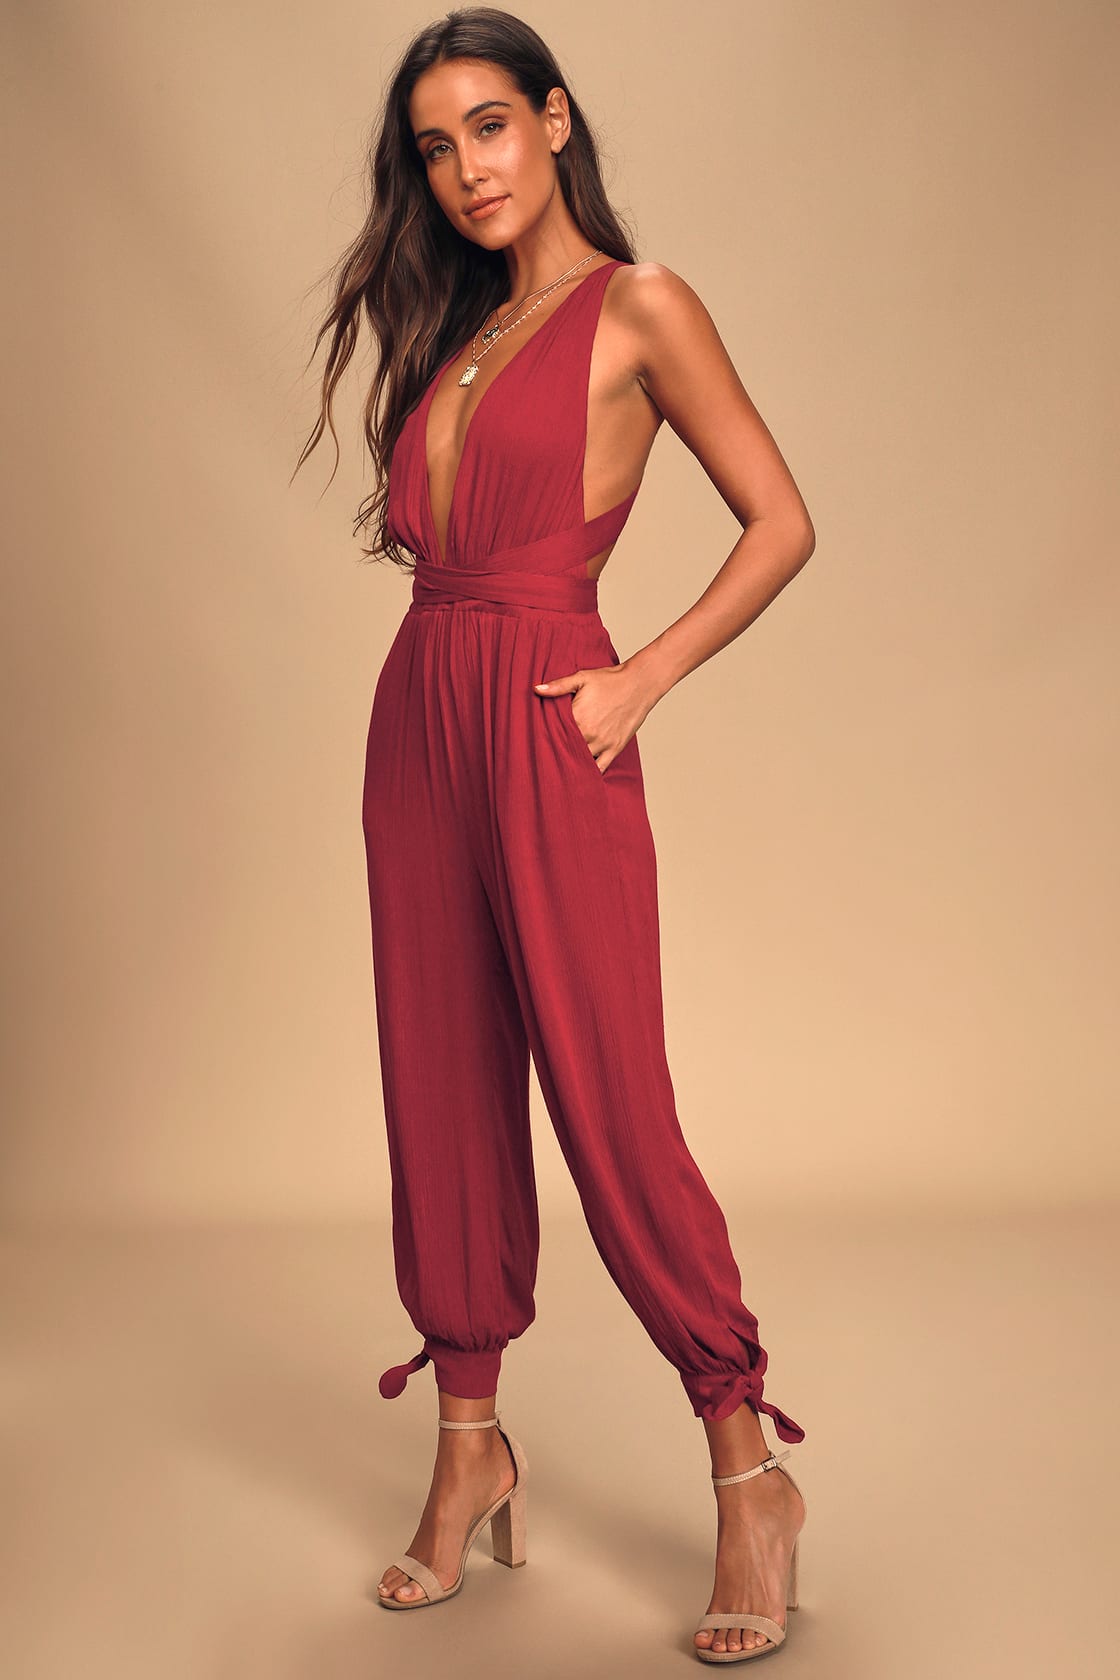 What To Wear When You Have Nothing To Wear: Rust red jumpsuit